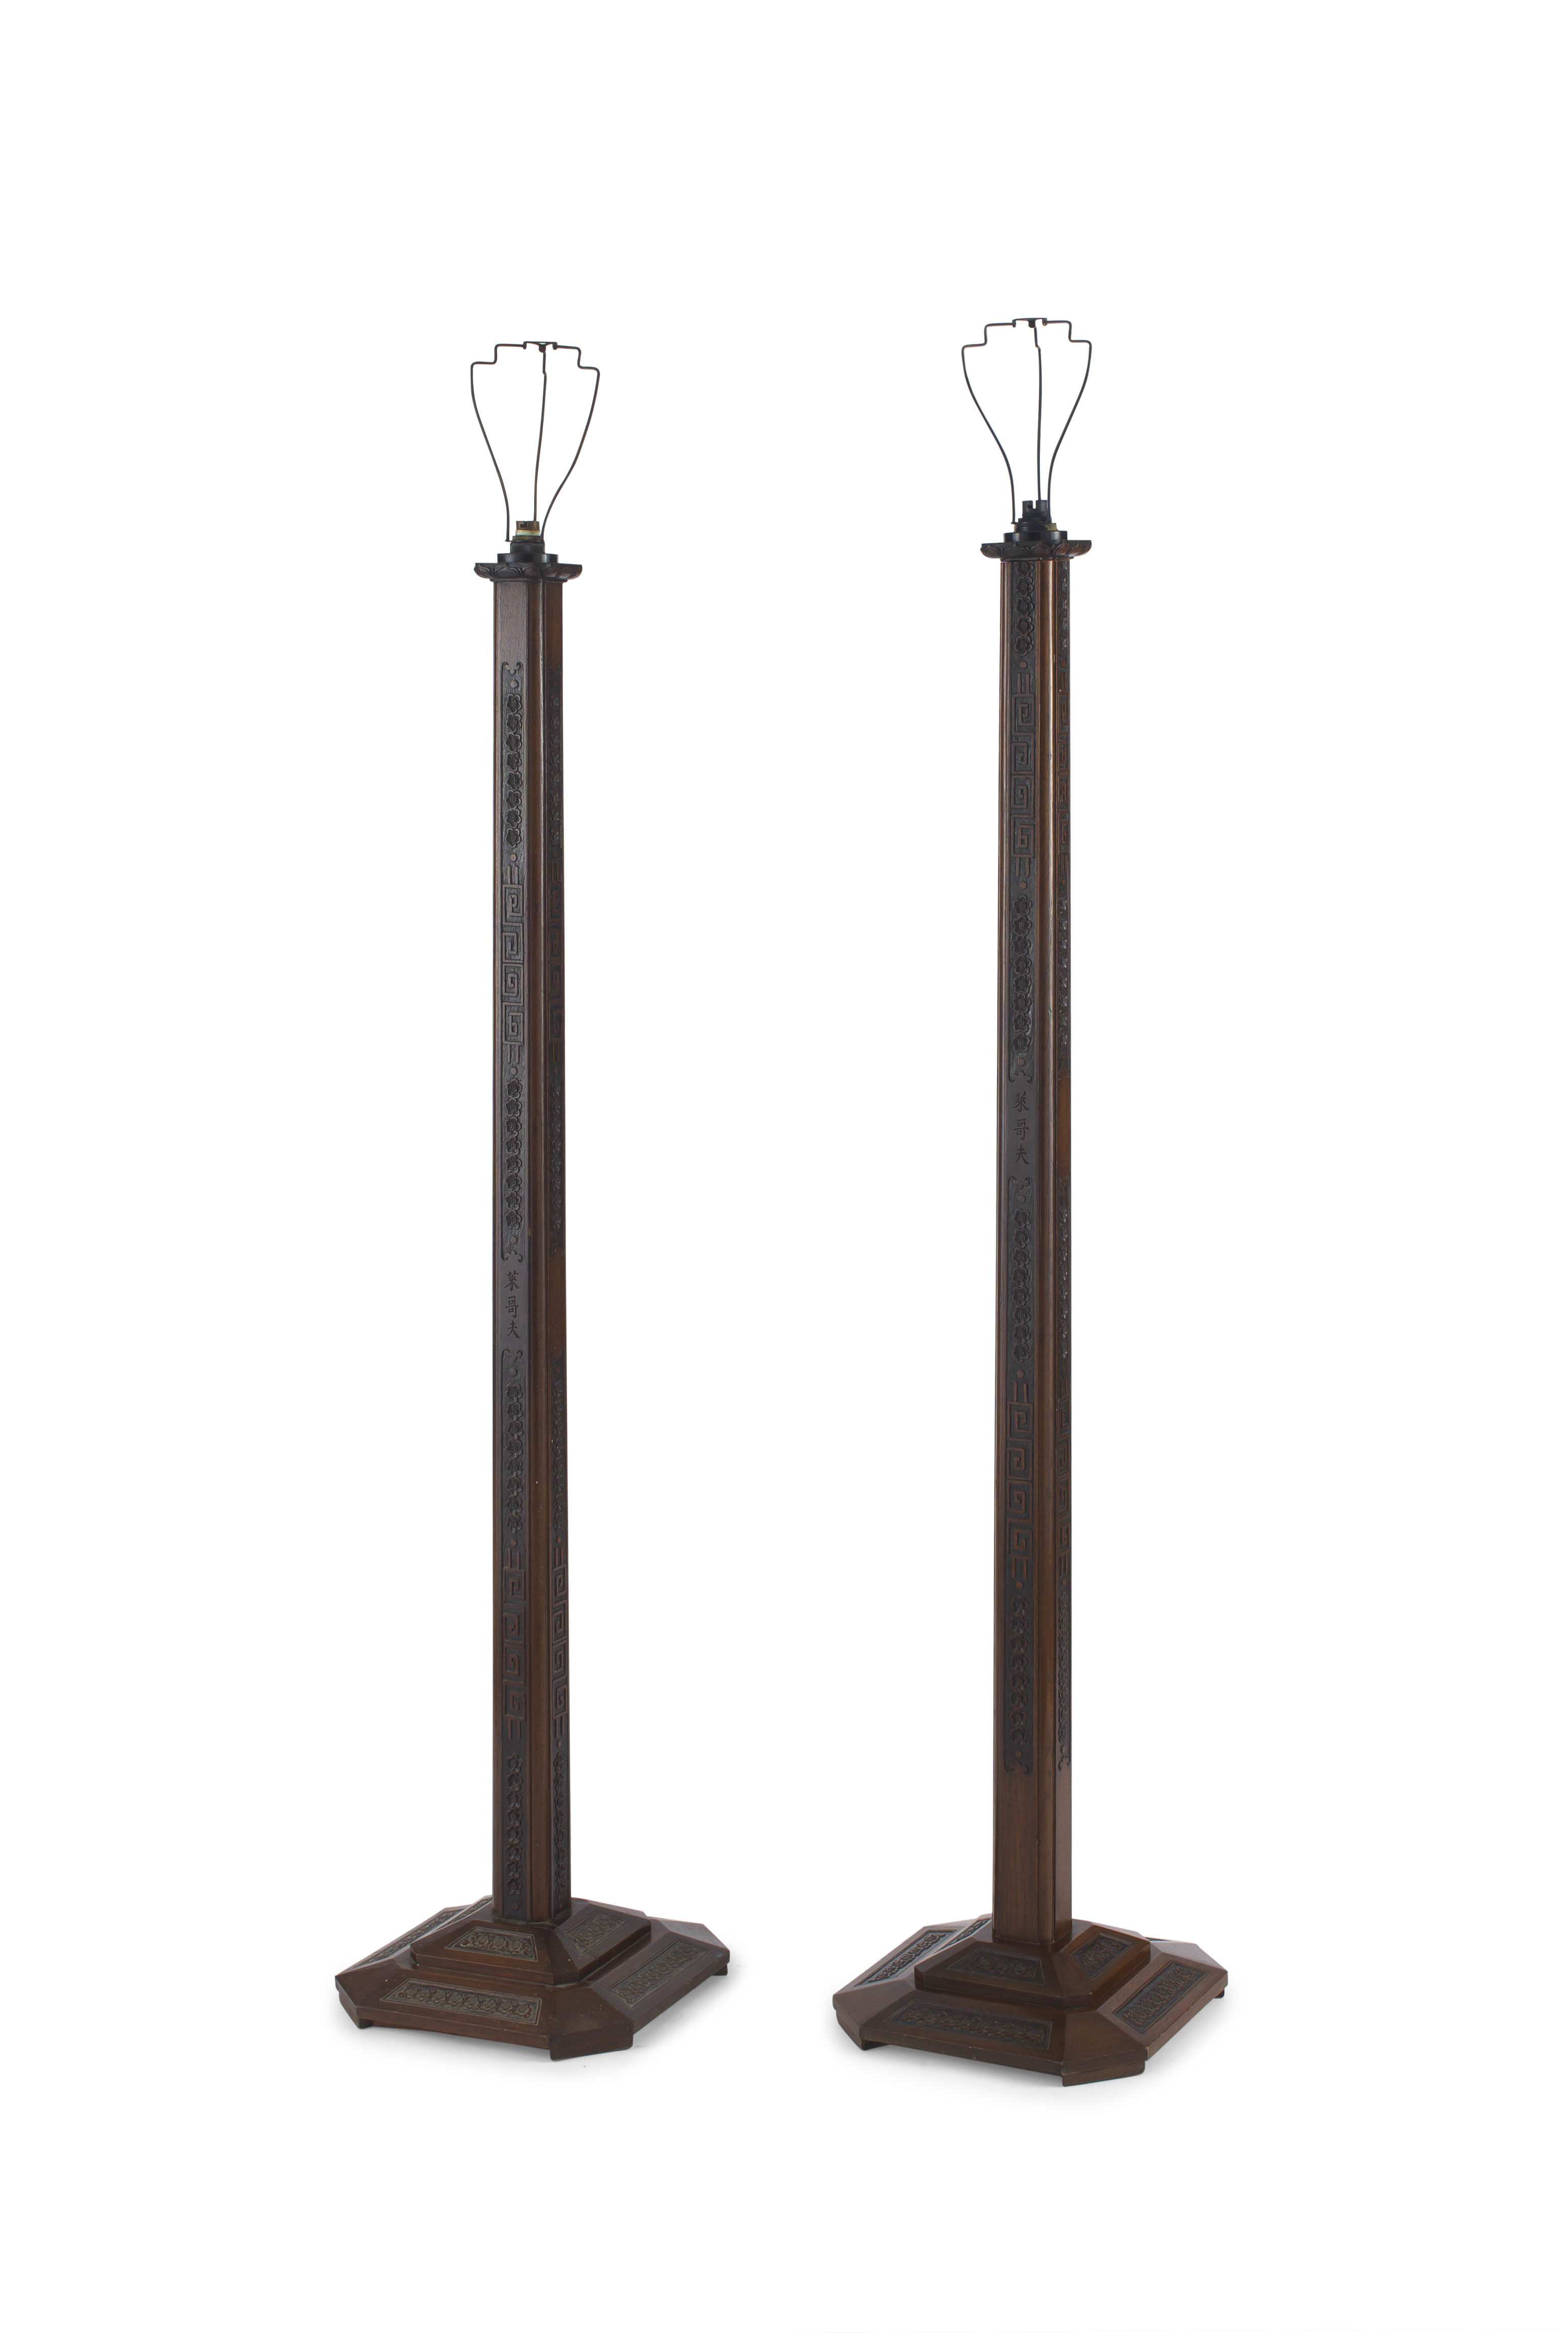 Two Chinese Export hardwood standing lamps, 20th century